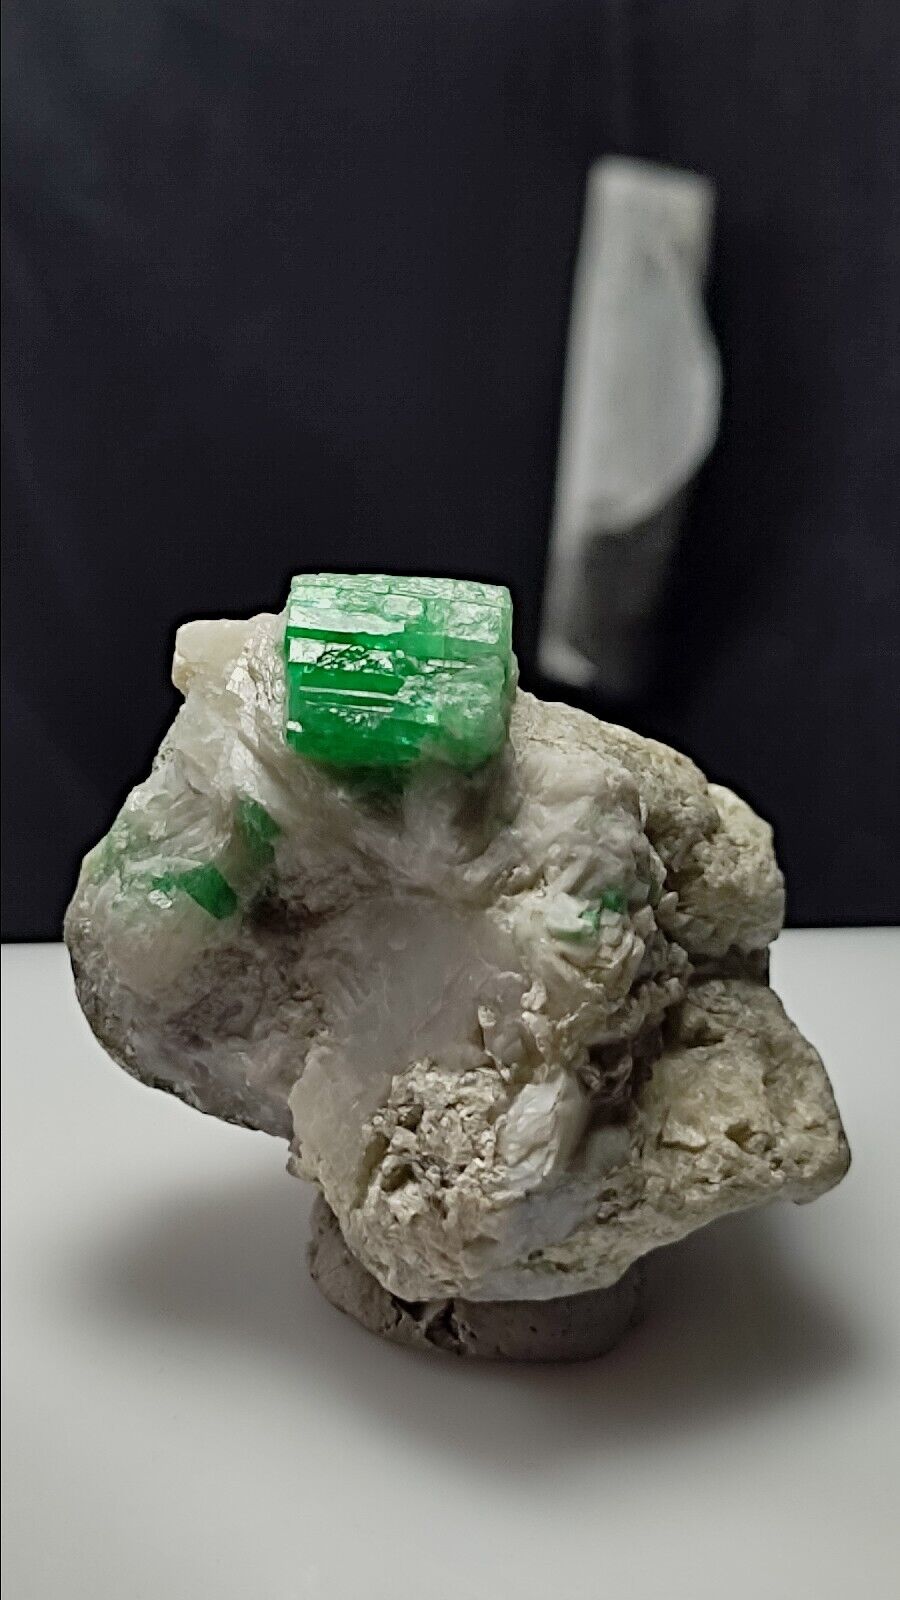 46gram Emerald crystal rough specimen collection peice from Swat Valley Pakistan